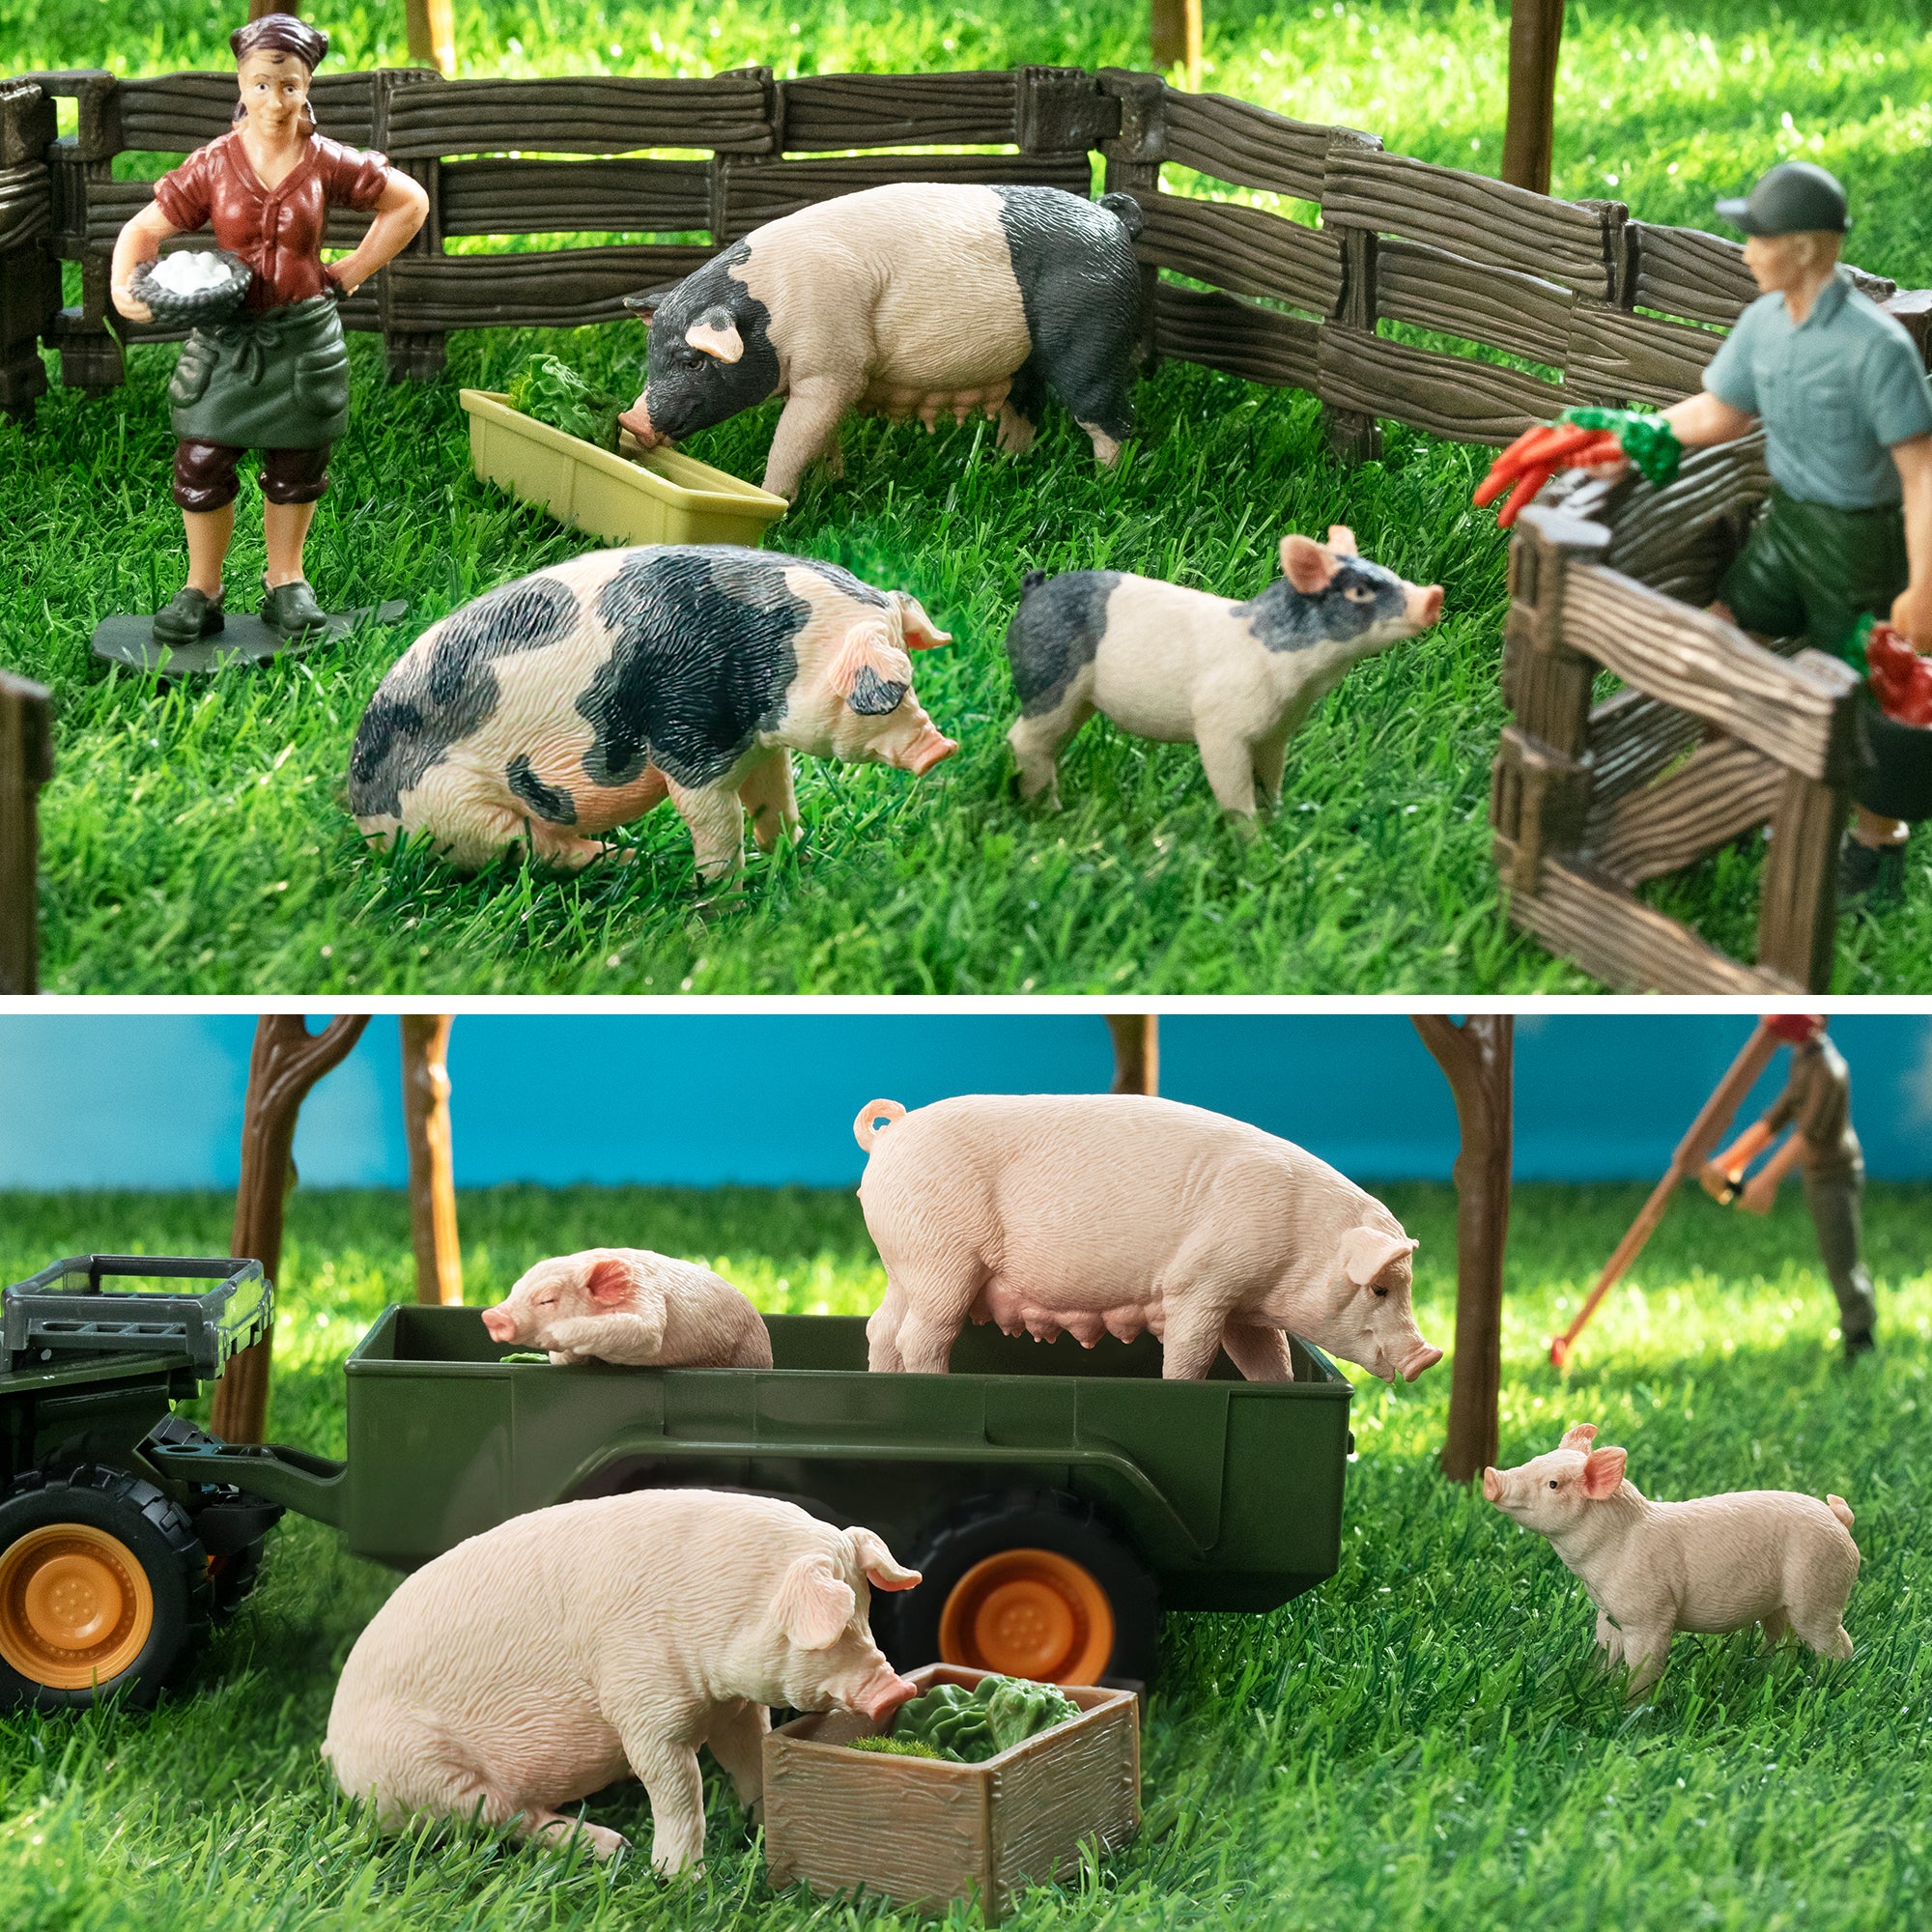 8-Piece Pig Family Figurines Playset with Adult & Baby Pigs-scene